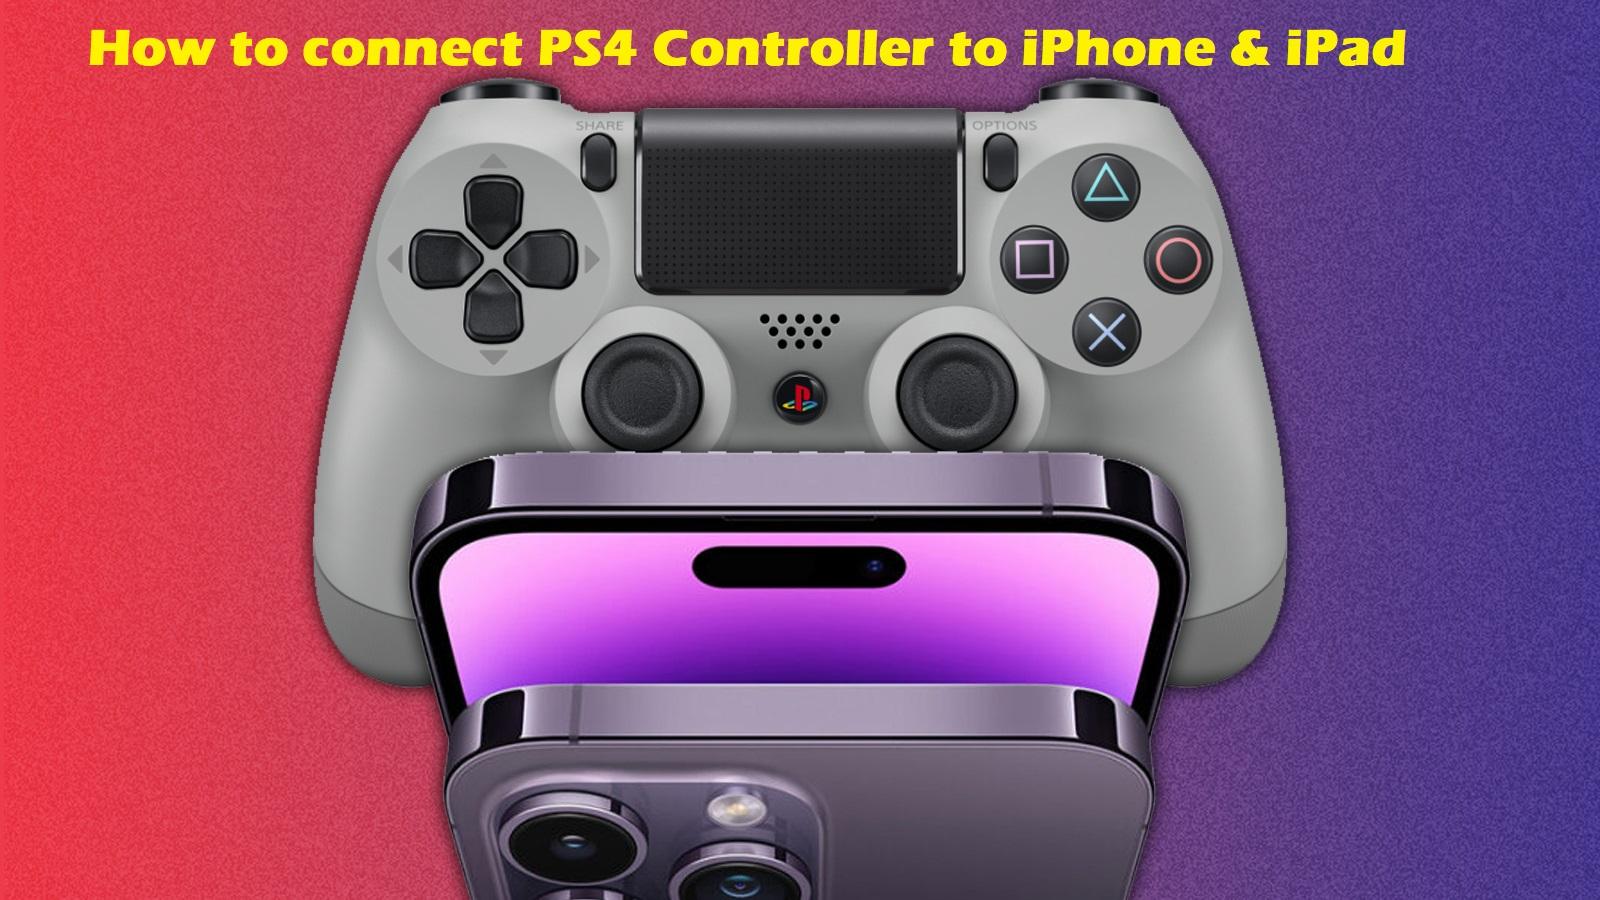 How to connect PS4 Controller to iPhone & iPad